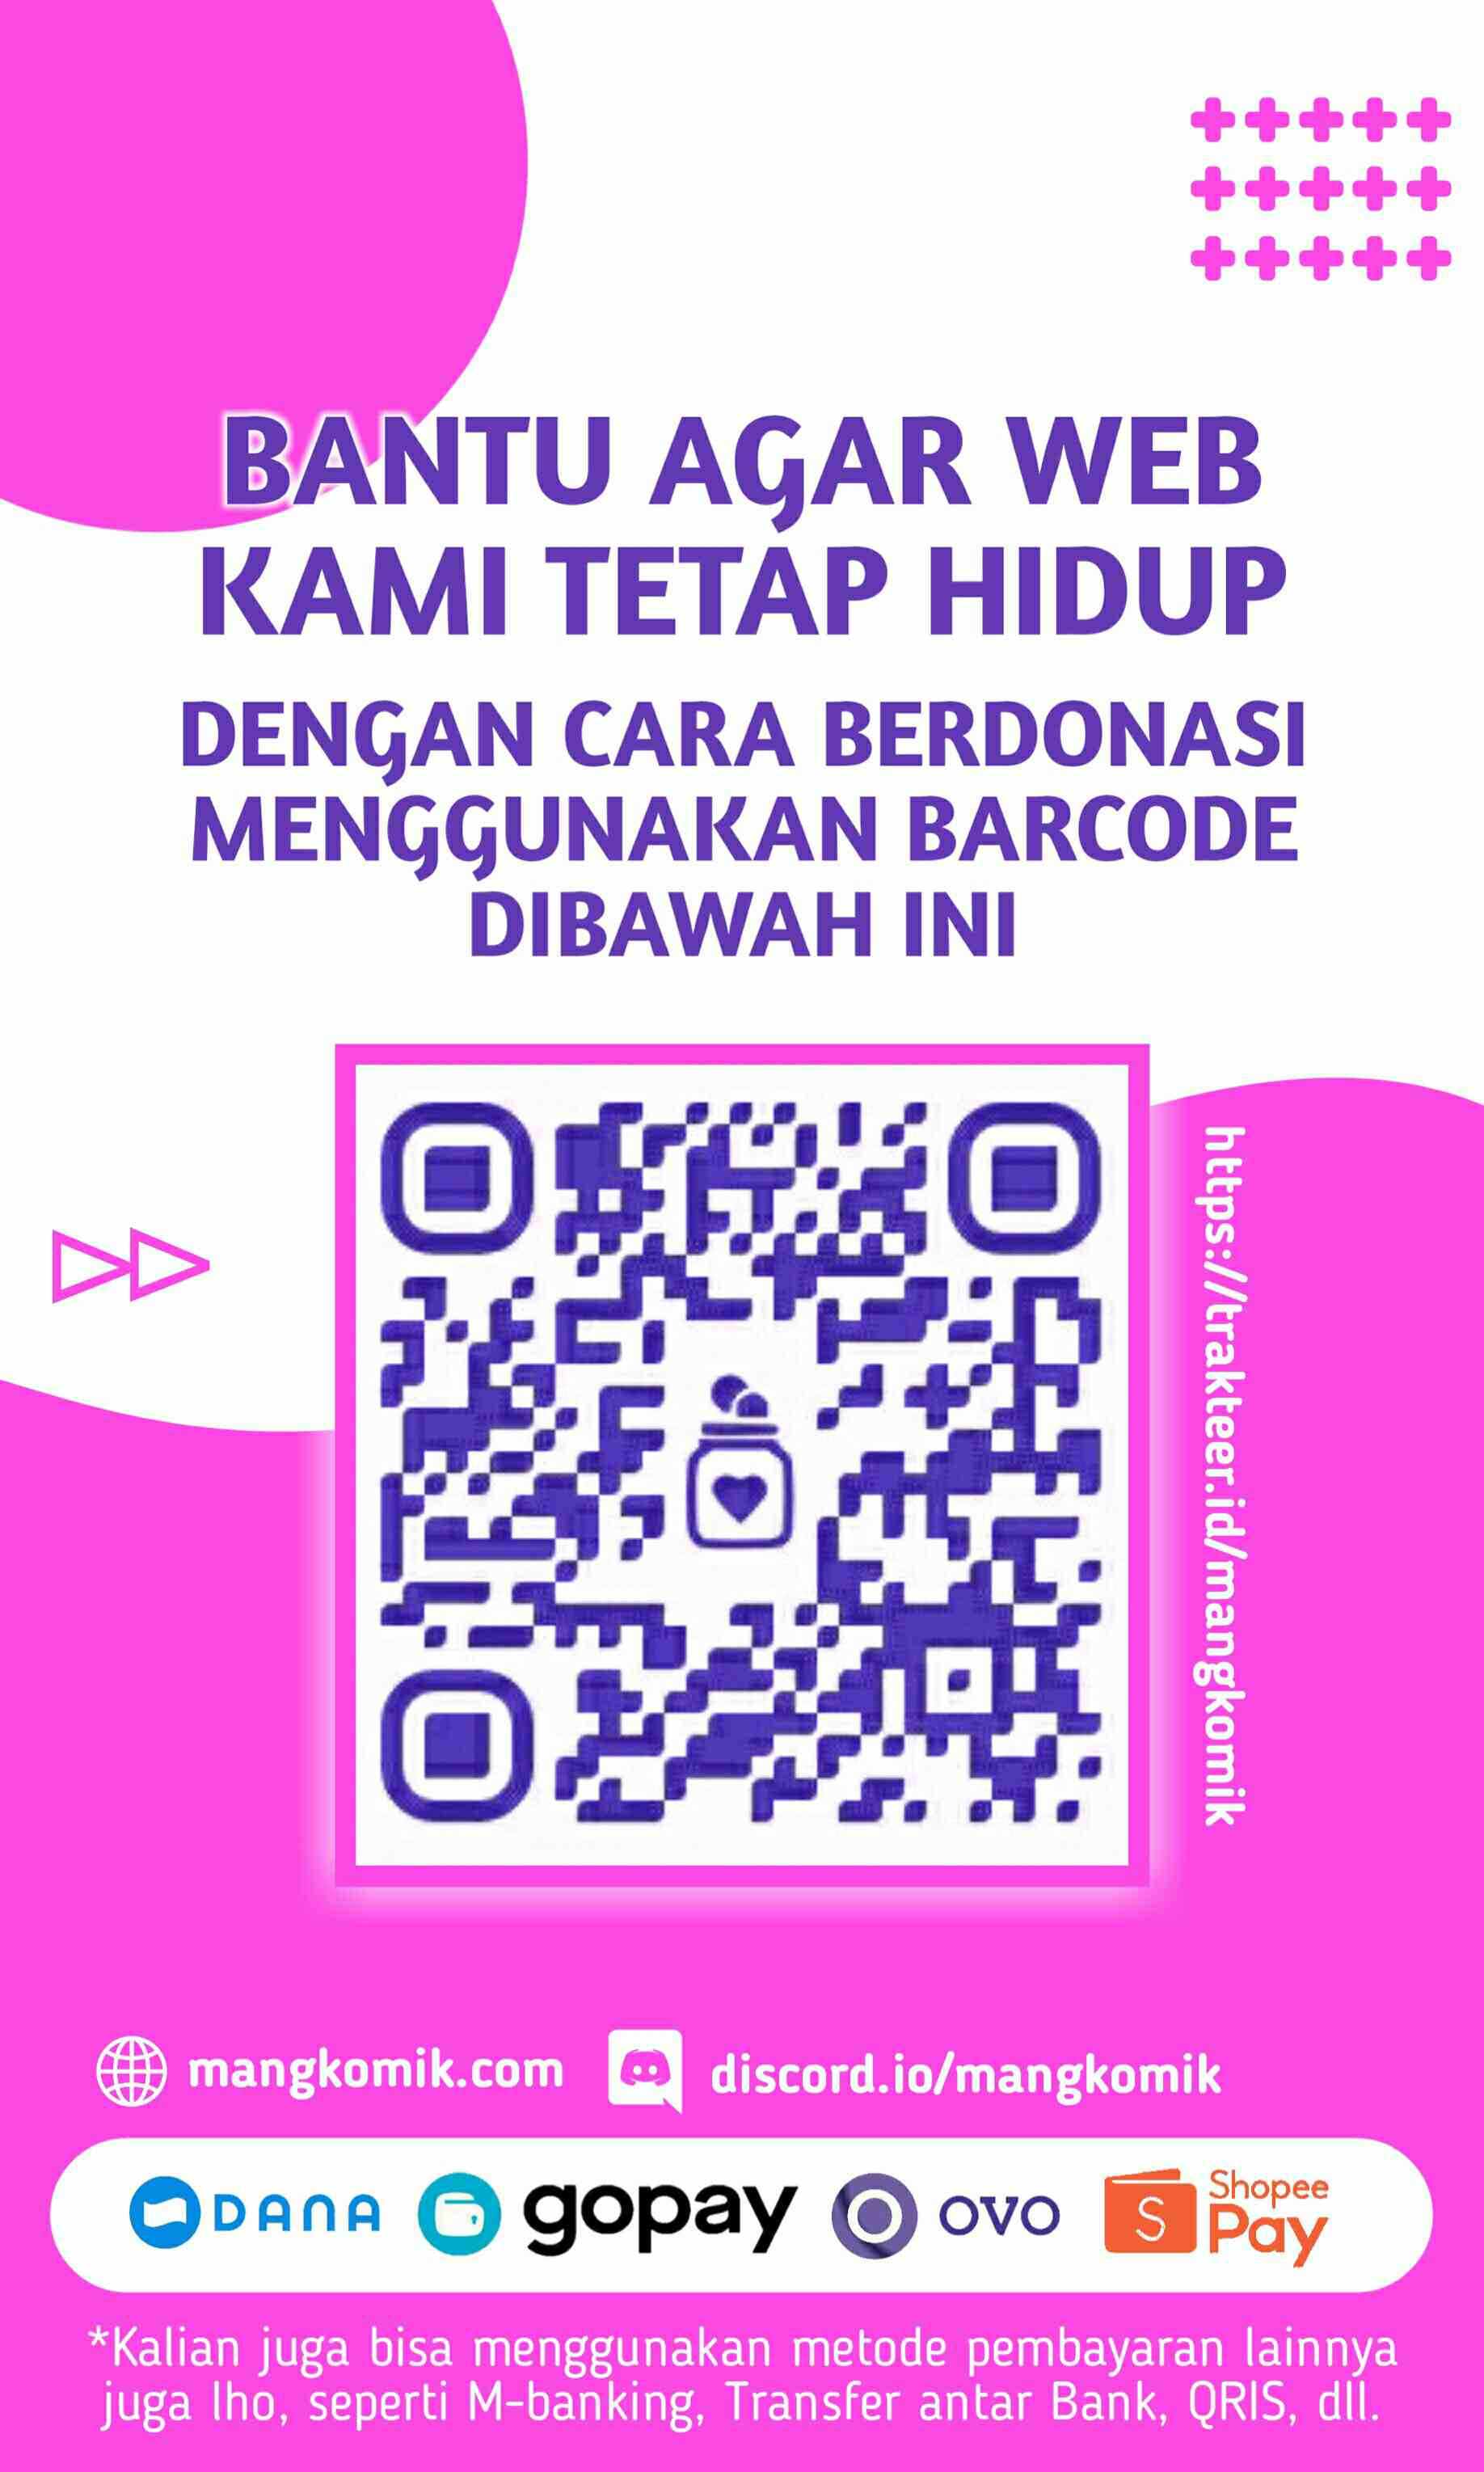 Blend S Chapter 36 Bahasa Indonesia